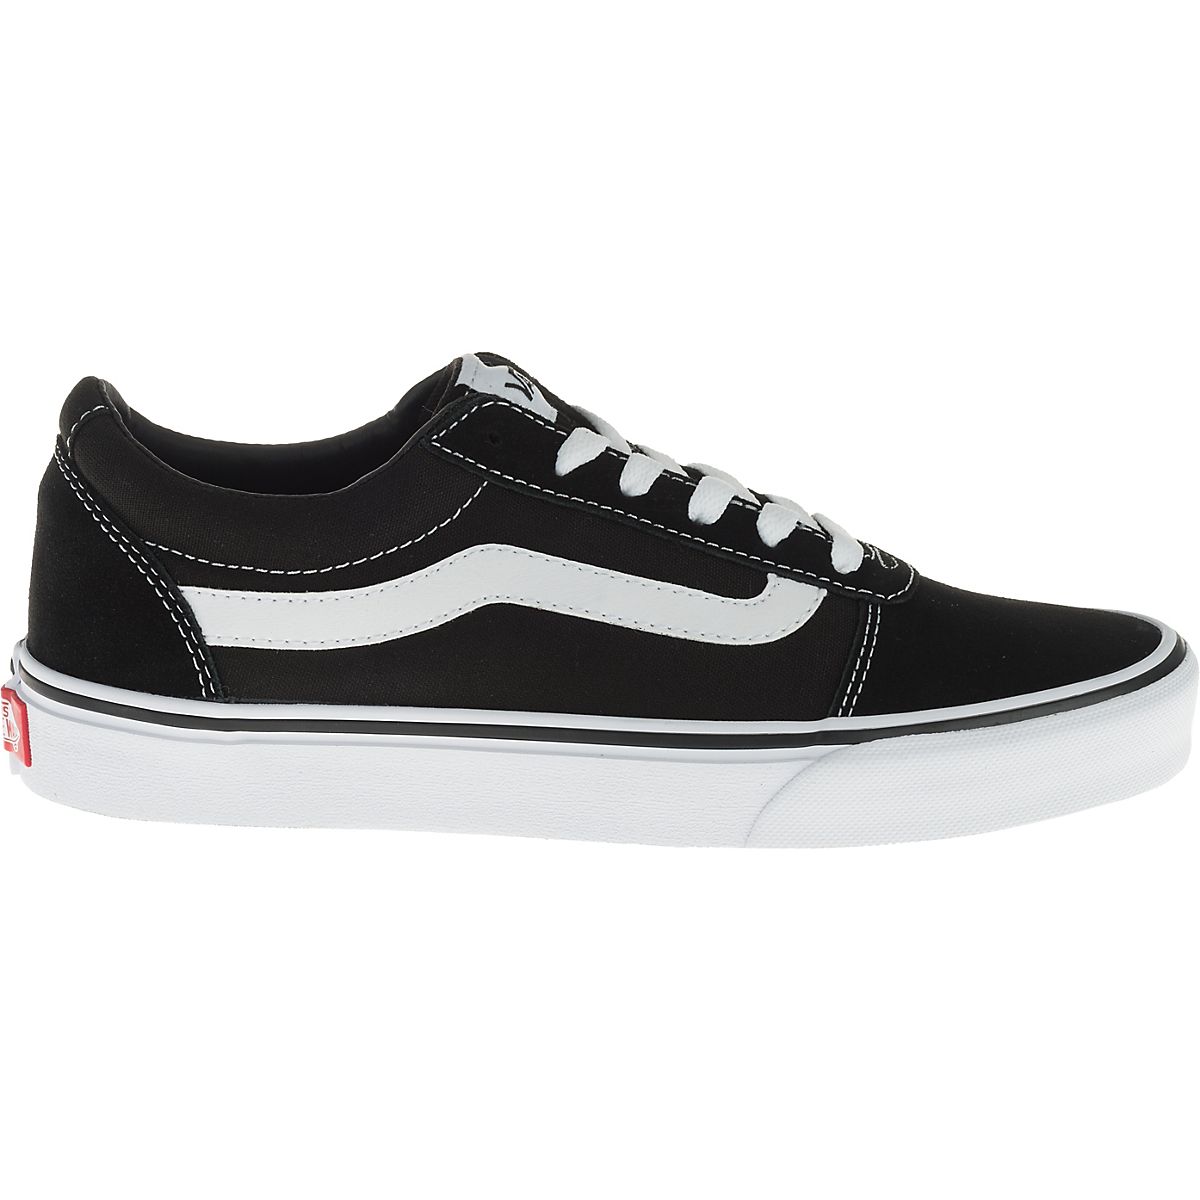 Vans Women's Ward Shoes | Free Shipping at Academy